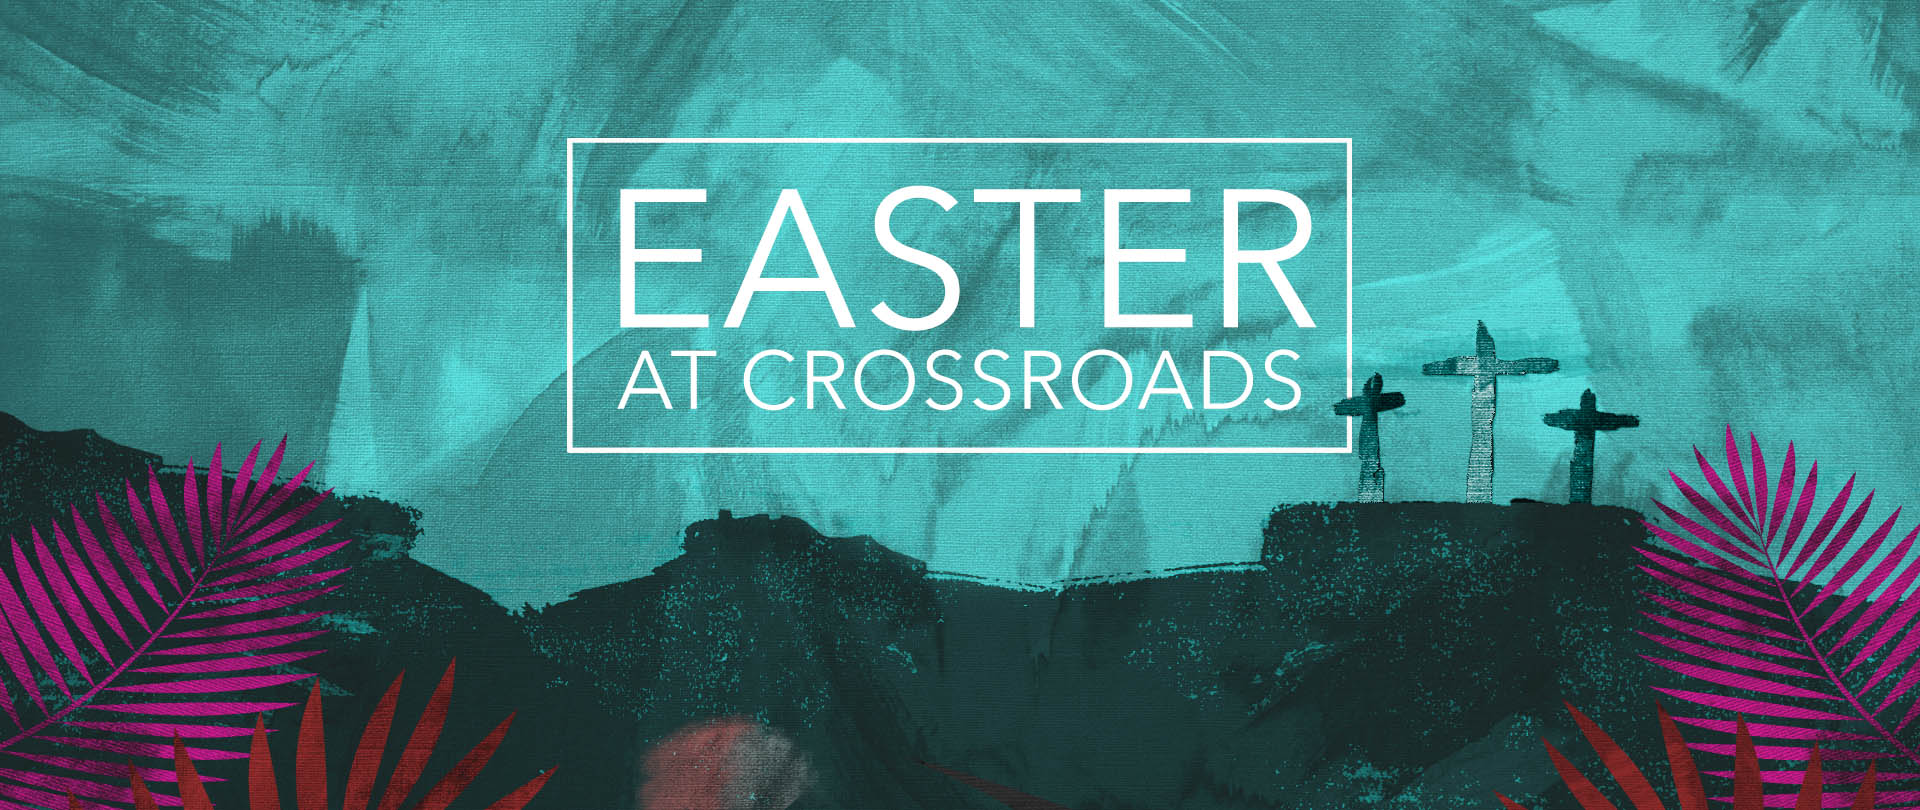 Easter at Crossroads
Sunday, March 31  |  9:00 & 11:00 AM
 
